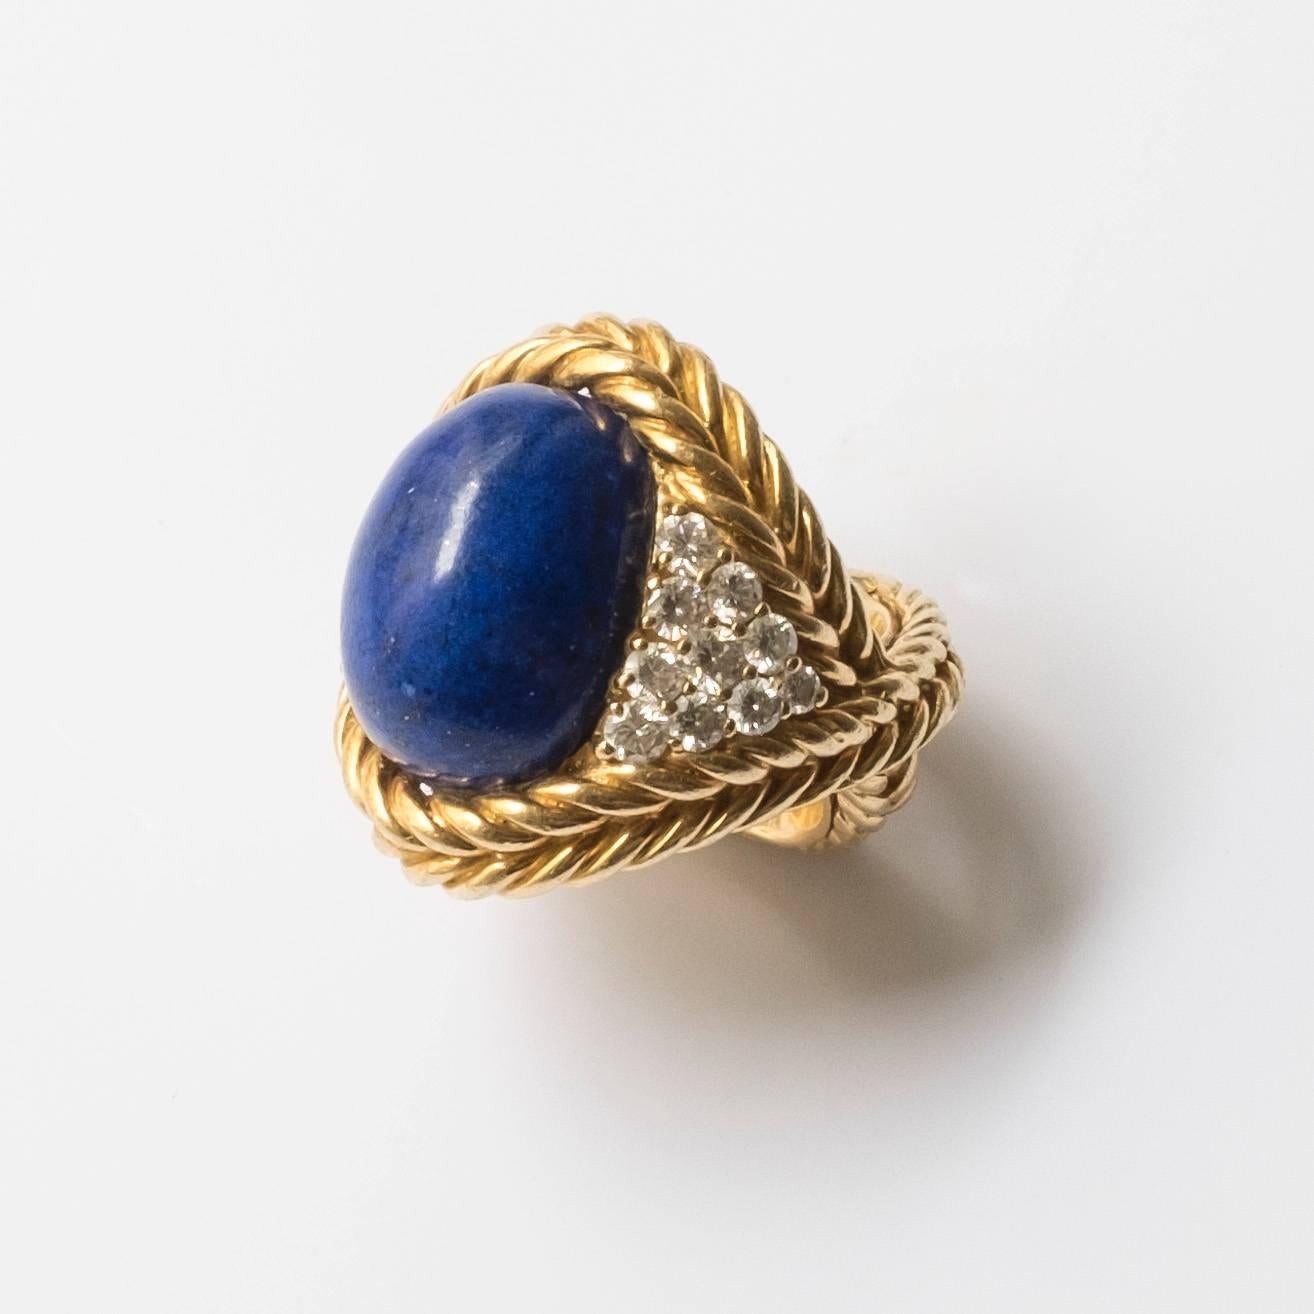 Magnificent ring by Boucheron composed of 18k gold, diamonds and lapis lazuli. The diamonds are geometrically arranged into a triangular form which are established on both sides of the centered lapis lazuli gem. The lapis lazuli and diamonds are